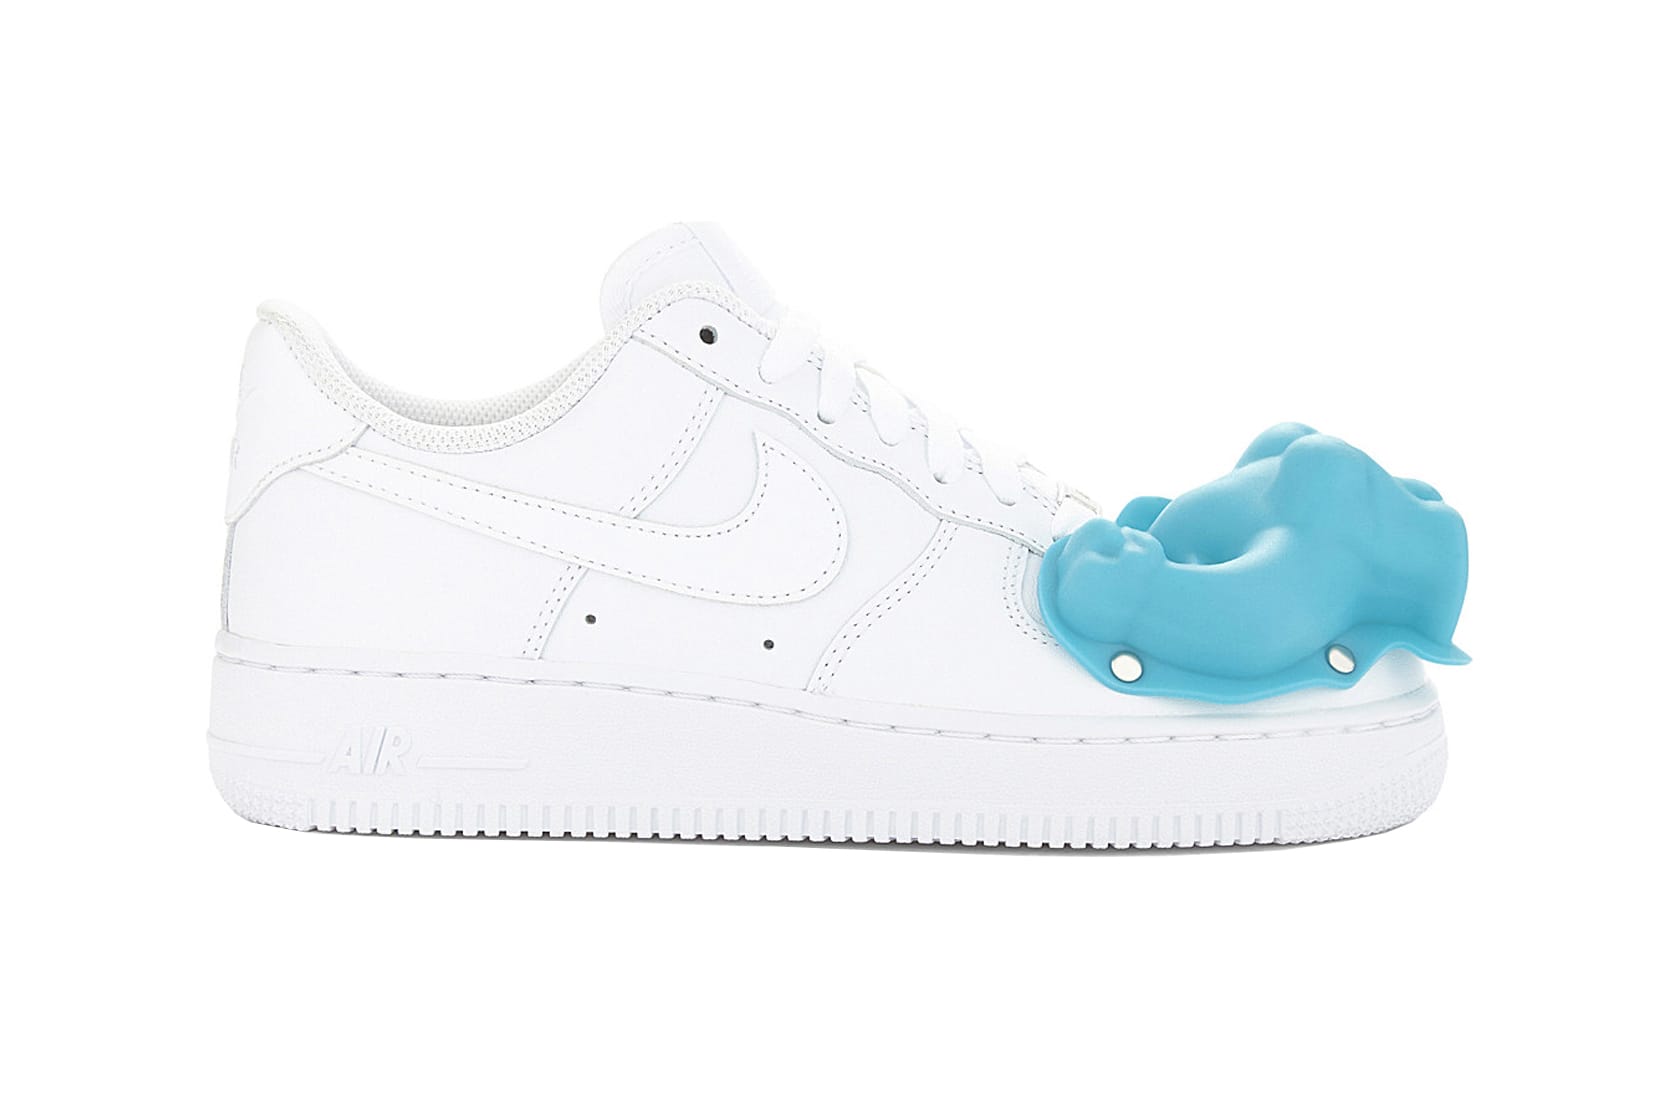 COMME des GARCONS x Nike Air Force 1 Closer Look | Hypebeast